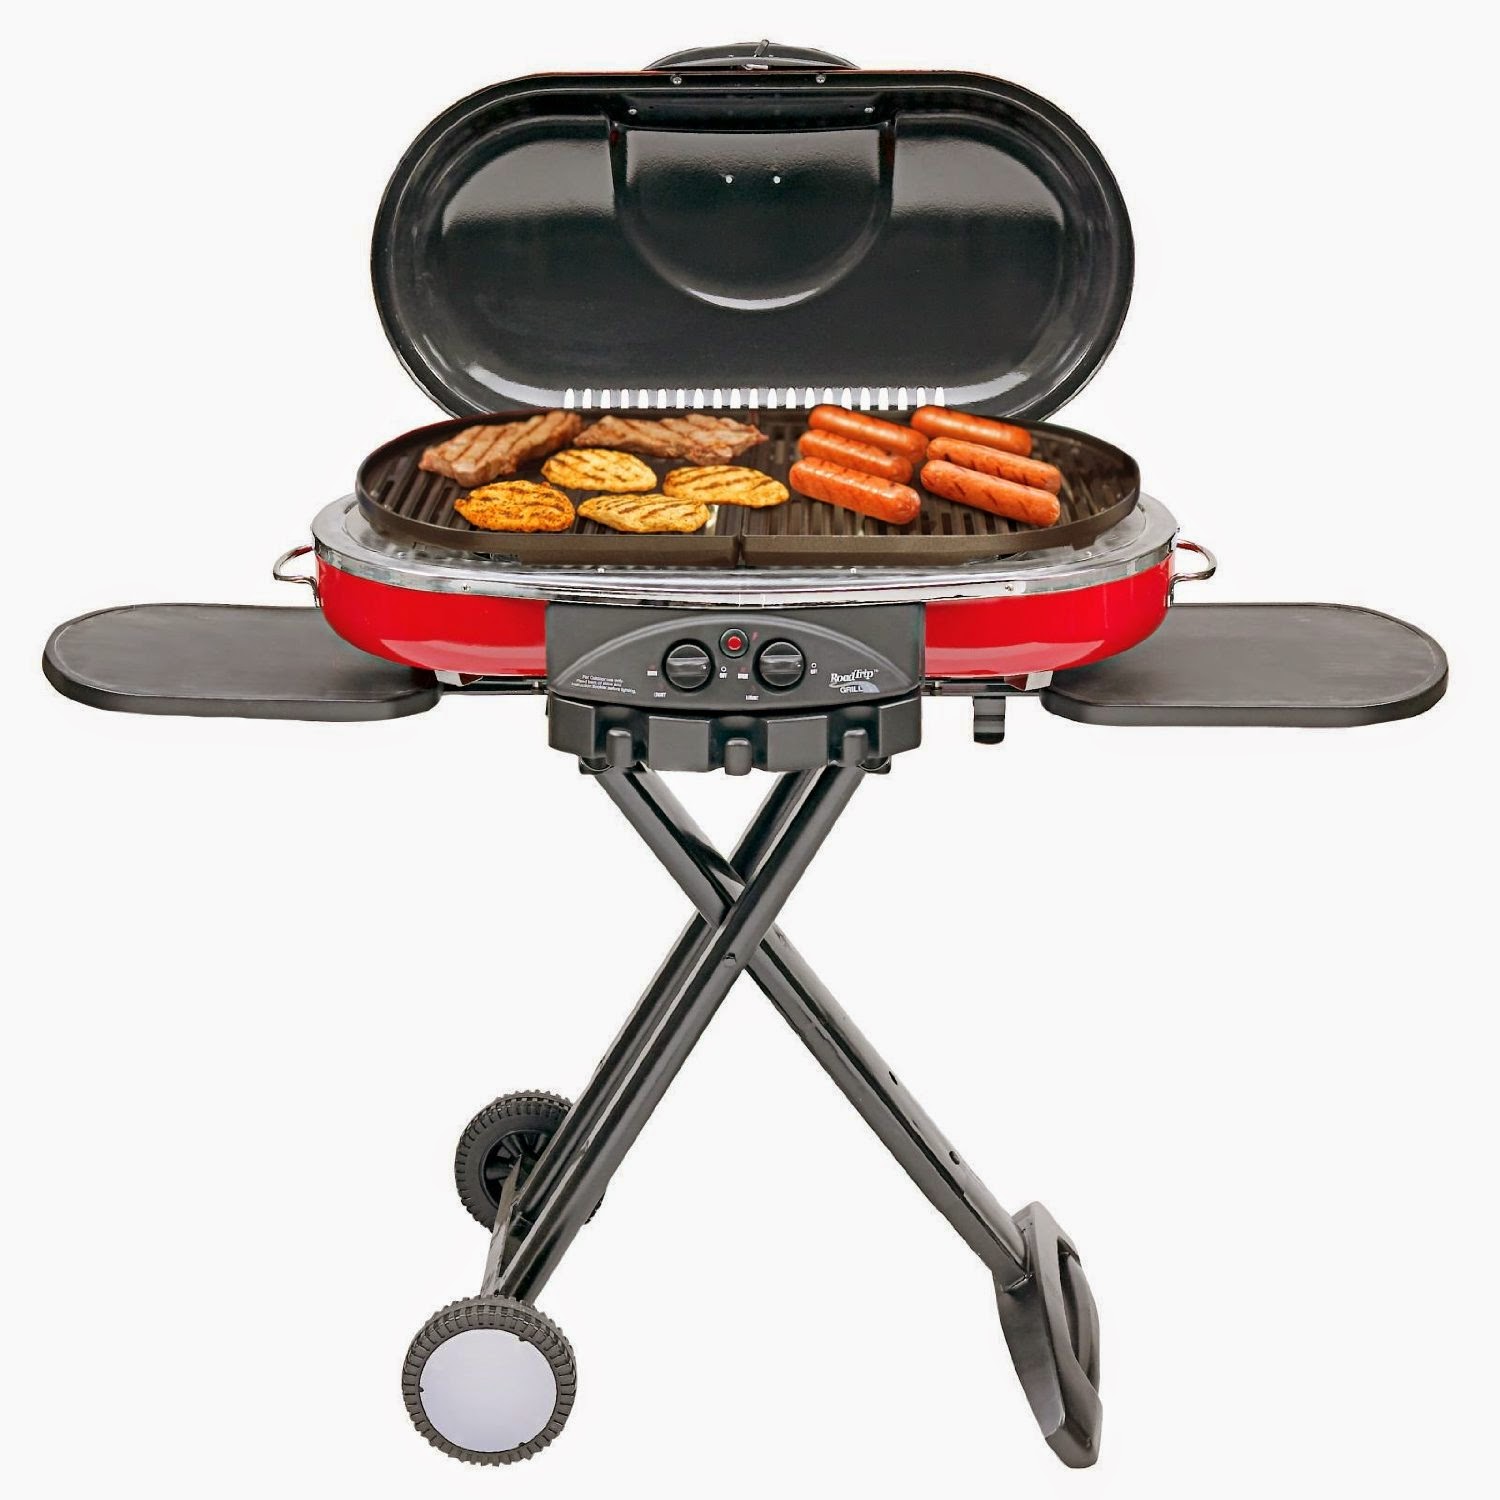 Coleman 9949-750 Road Trip LXE Propane Grill, picture, image, review features and specifications